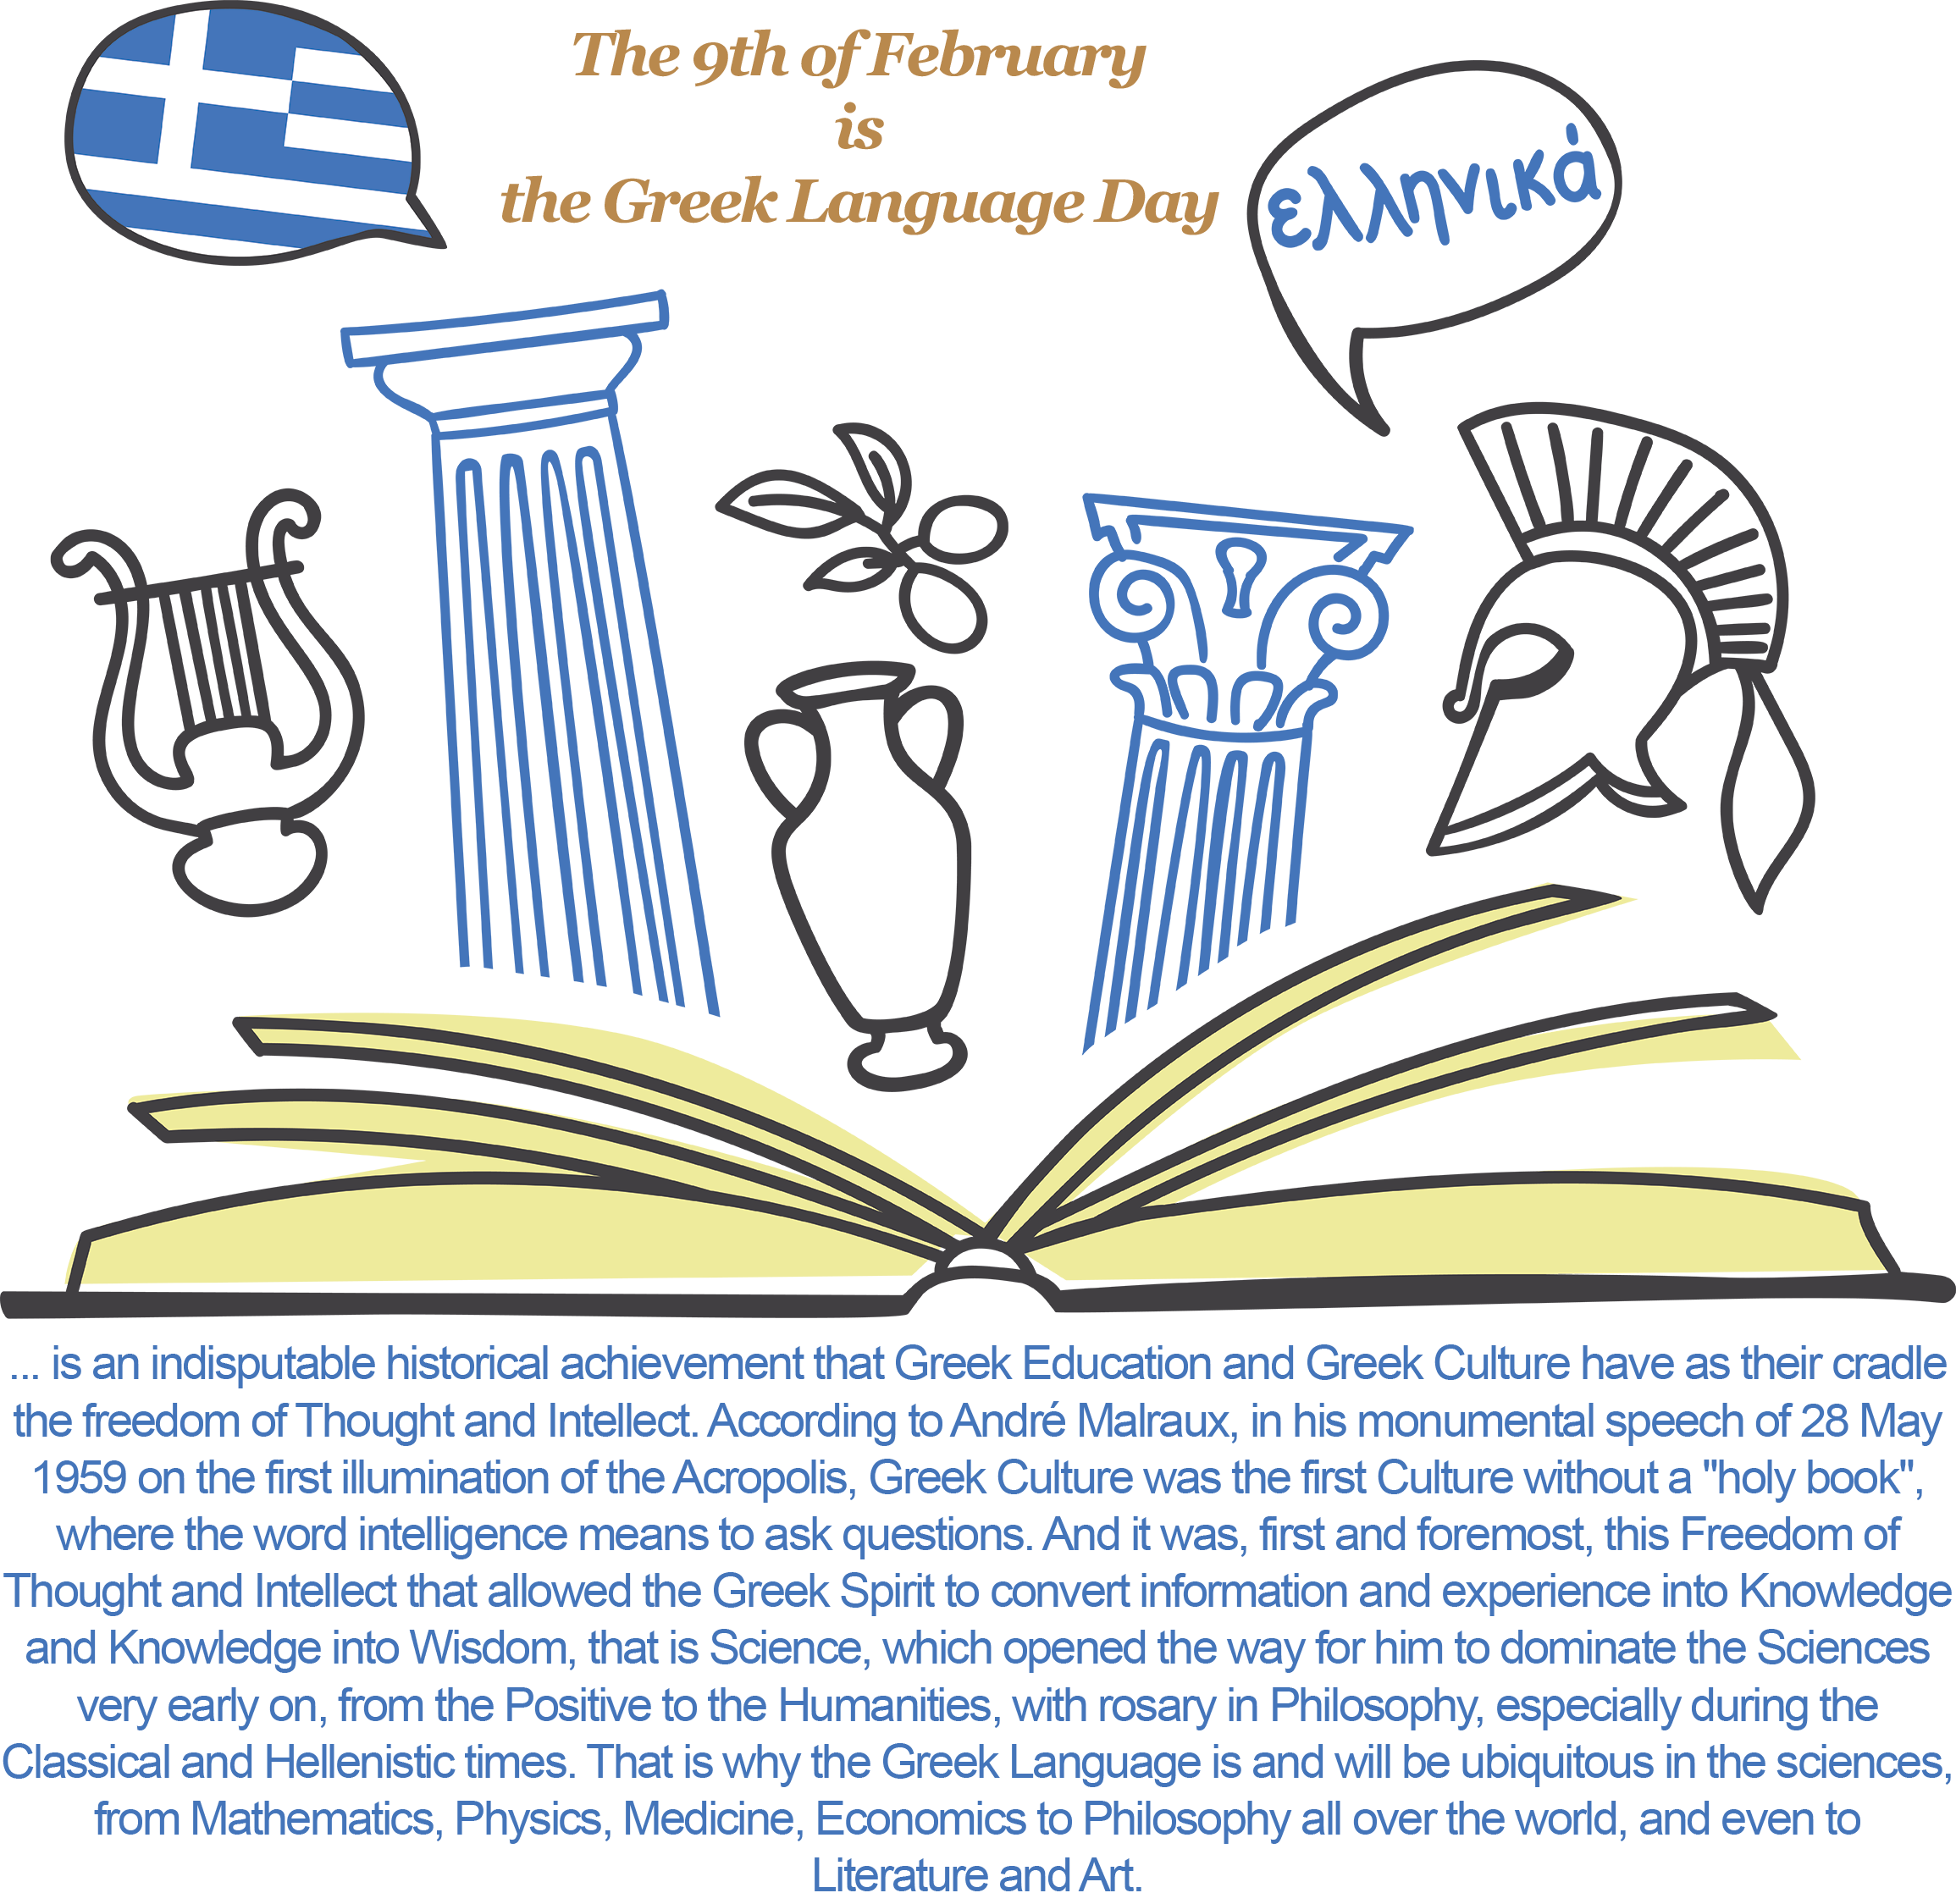 The Early History of the Greek Language Indo-European and Pre-Greek Influences